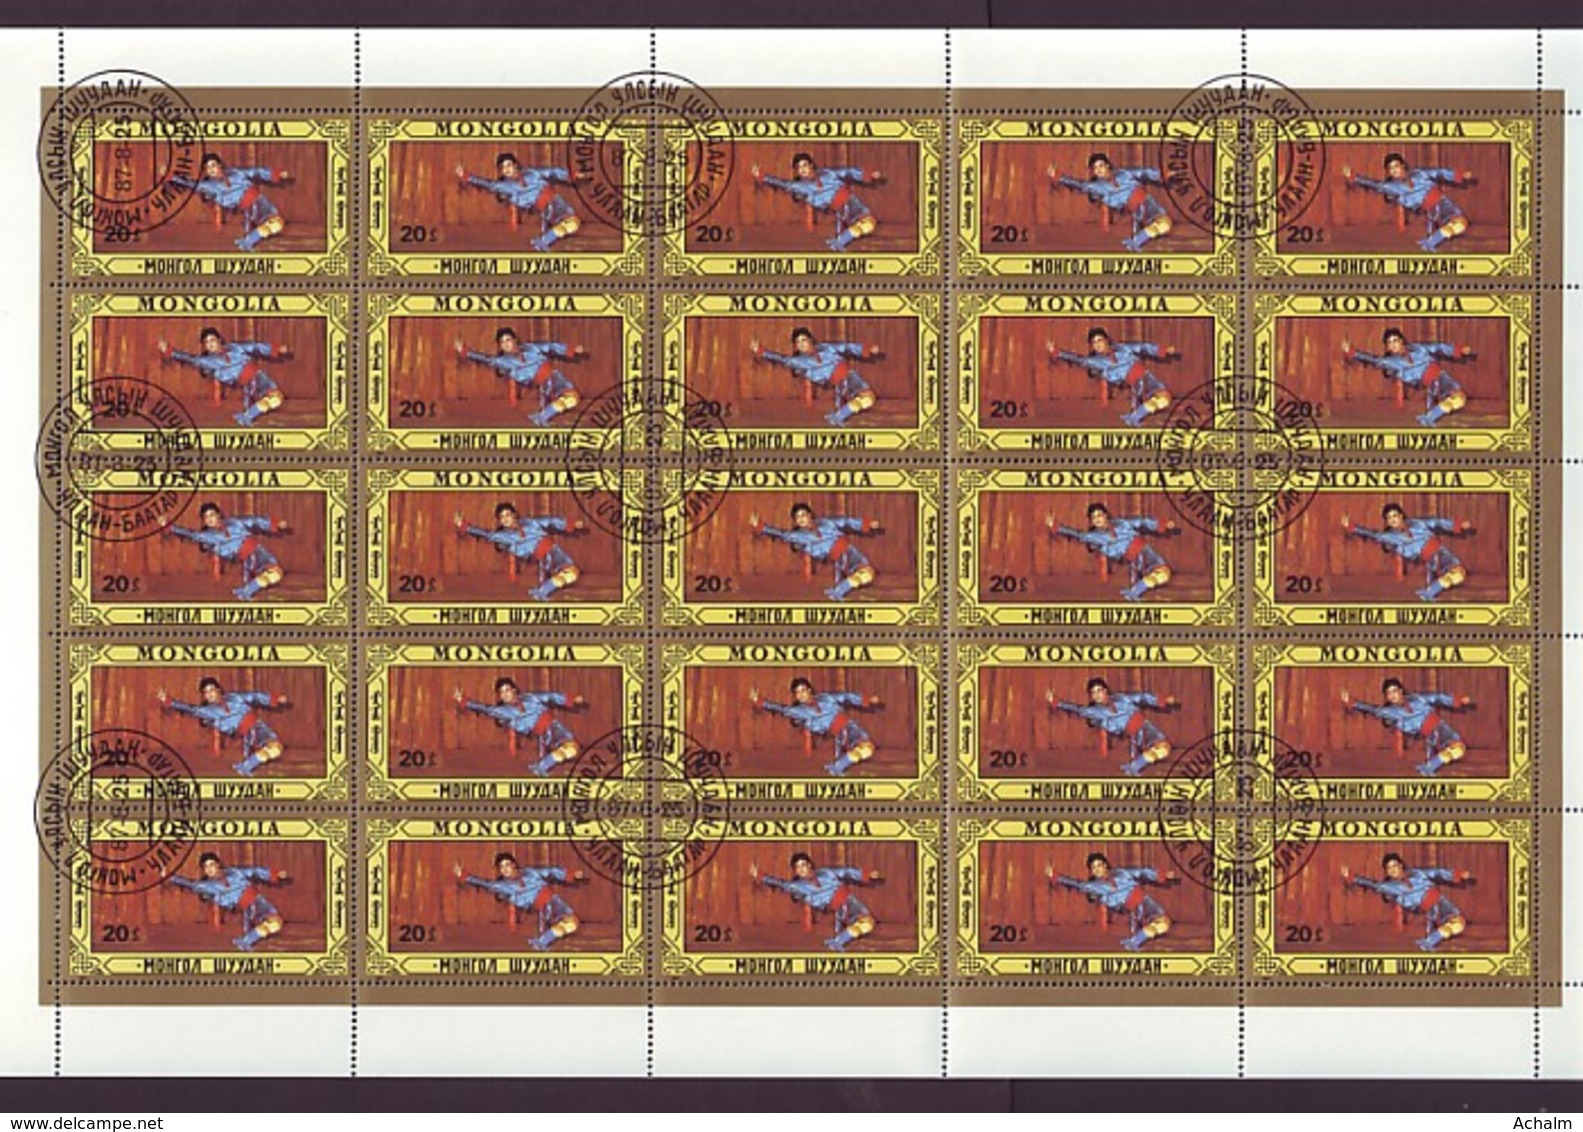 Mongolei/Mongolia Of 1987 - Sheet Of Stamps 25 X MiNr. 1885 Used - Folklore Dancers And Dance Groups - Mongolei